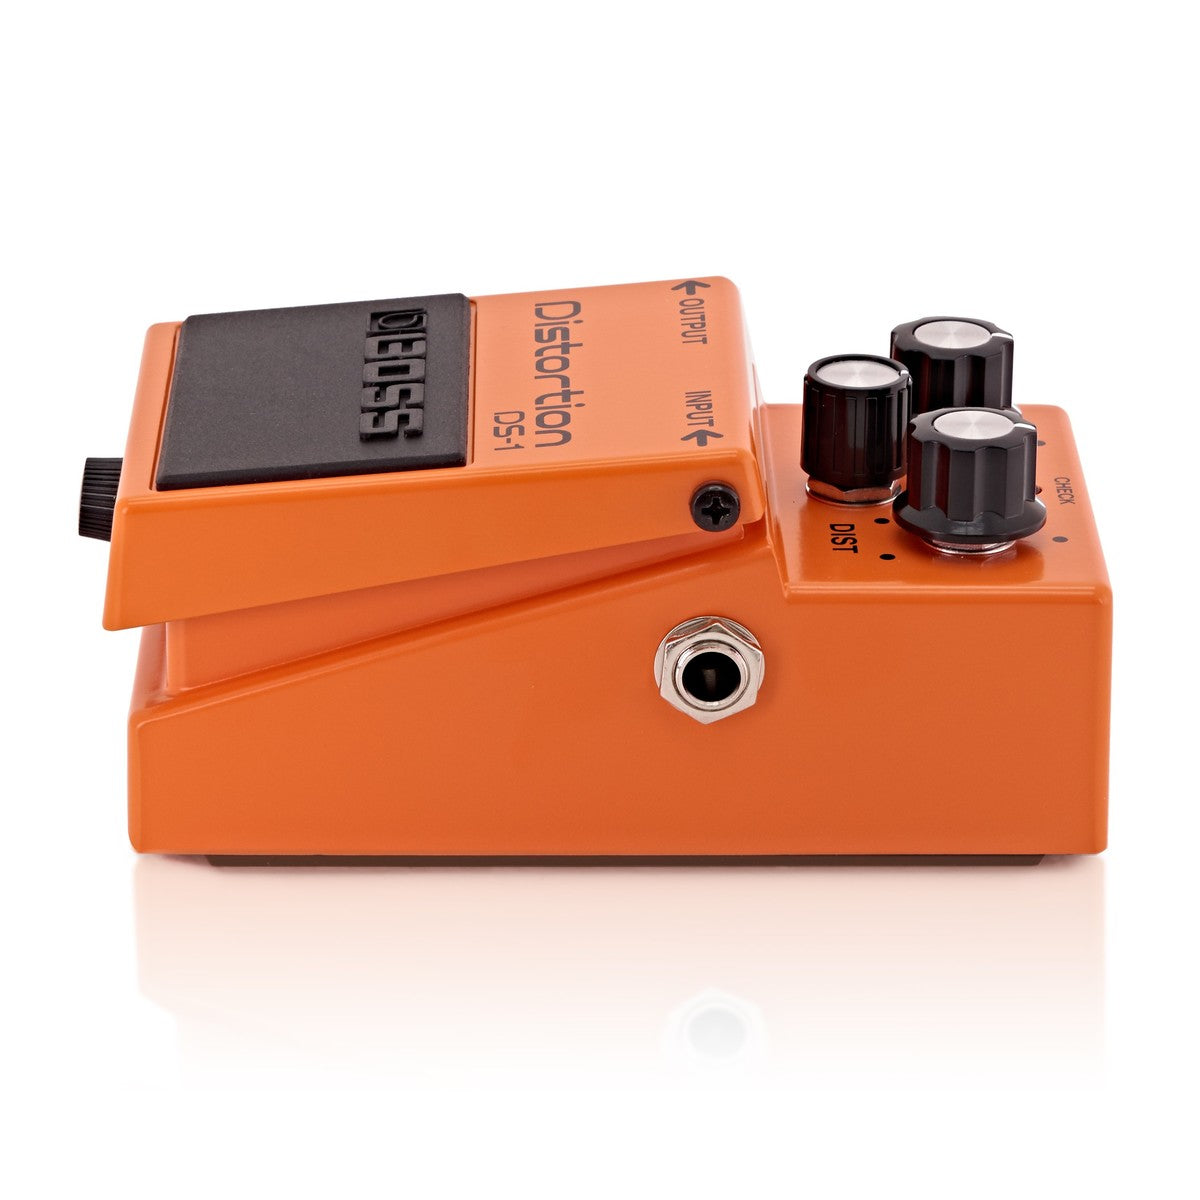 Boss DS-1 Distortion Guitar Effect Pedal (DS1) - Reco Music Malaysia